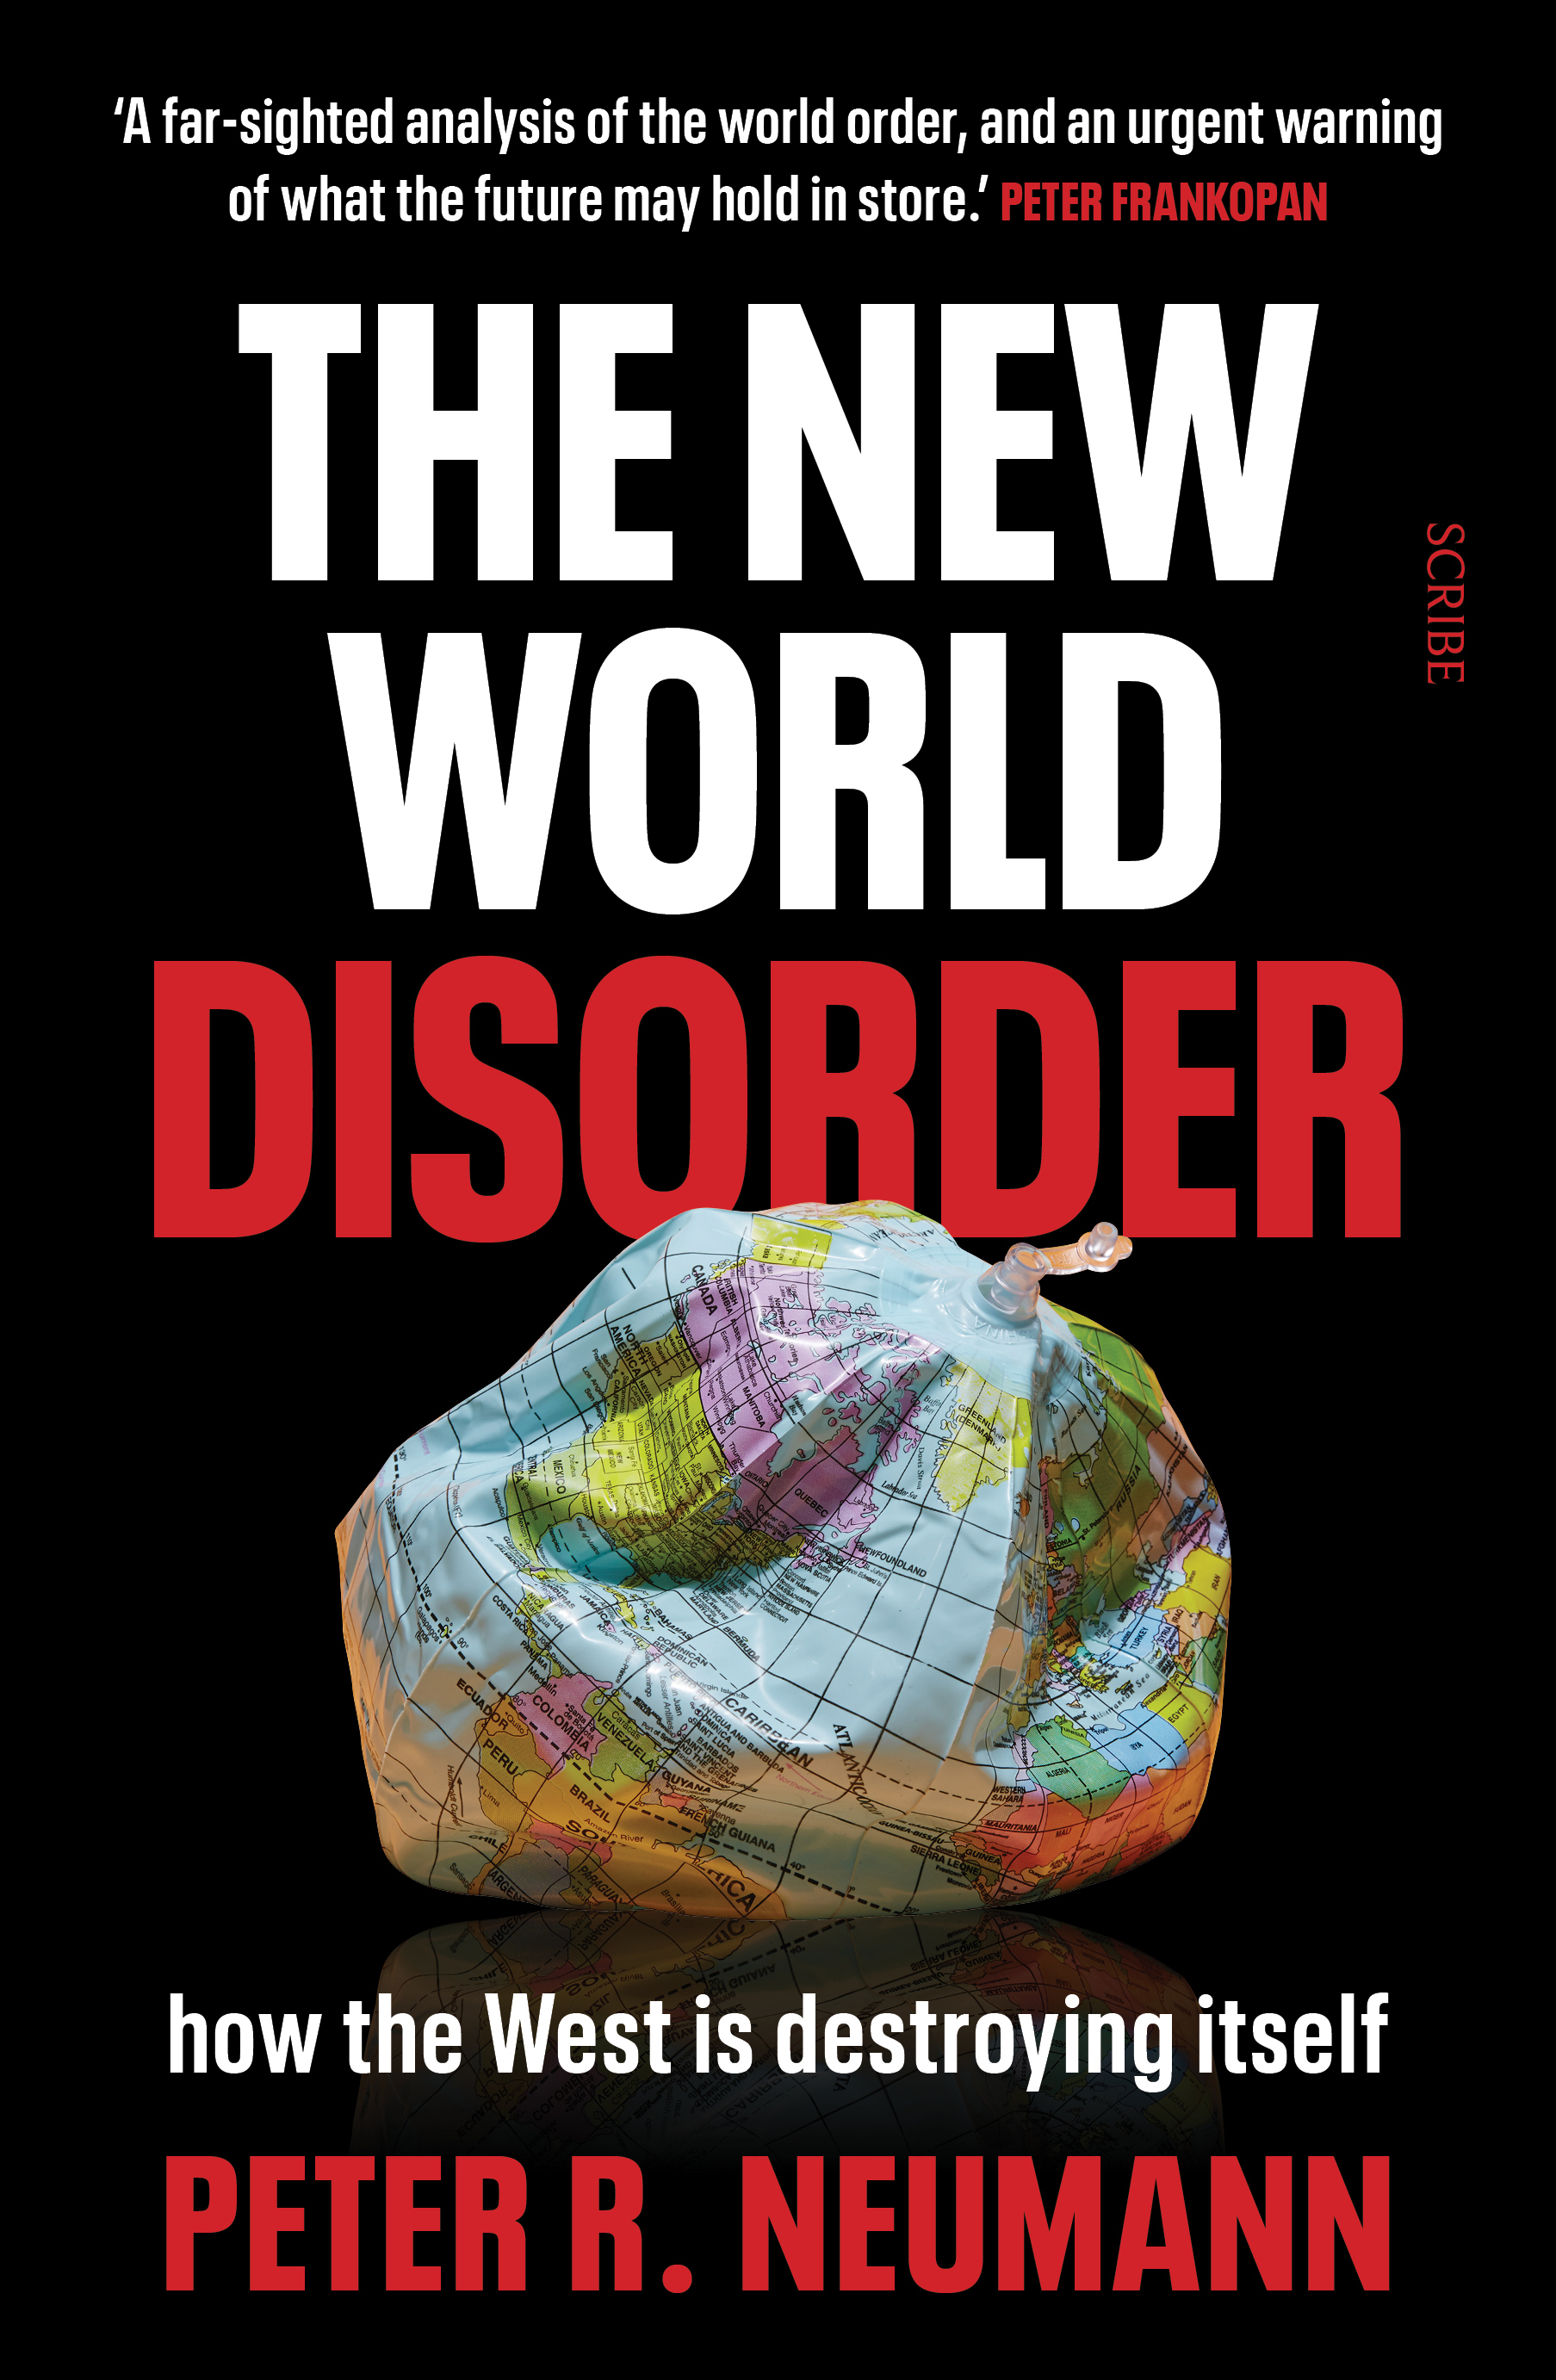 The New World Disorder: How the West is destroying itself